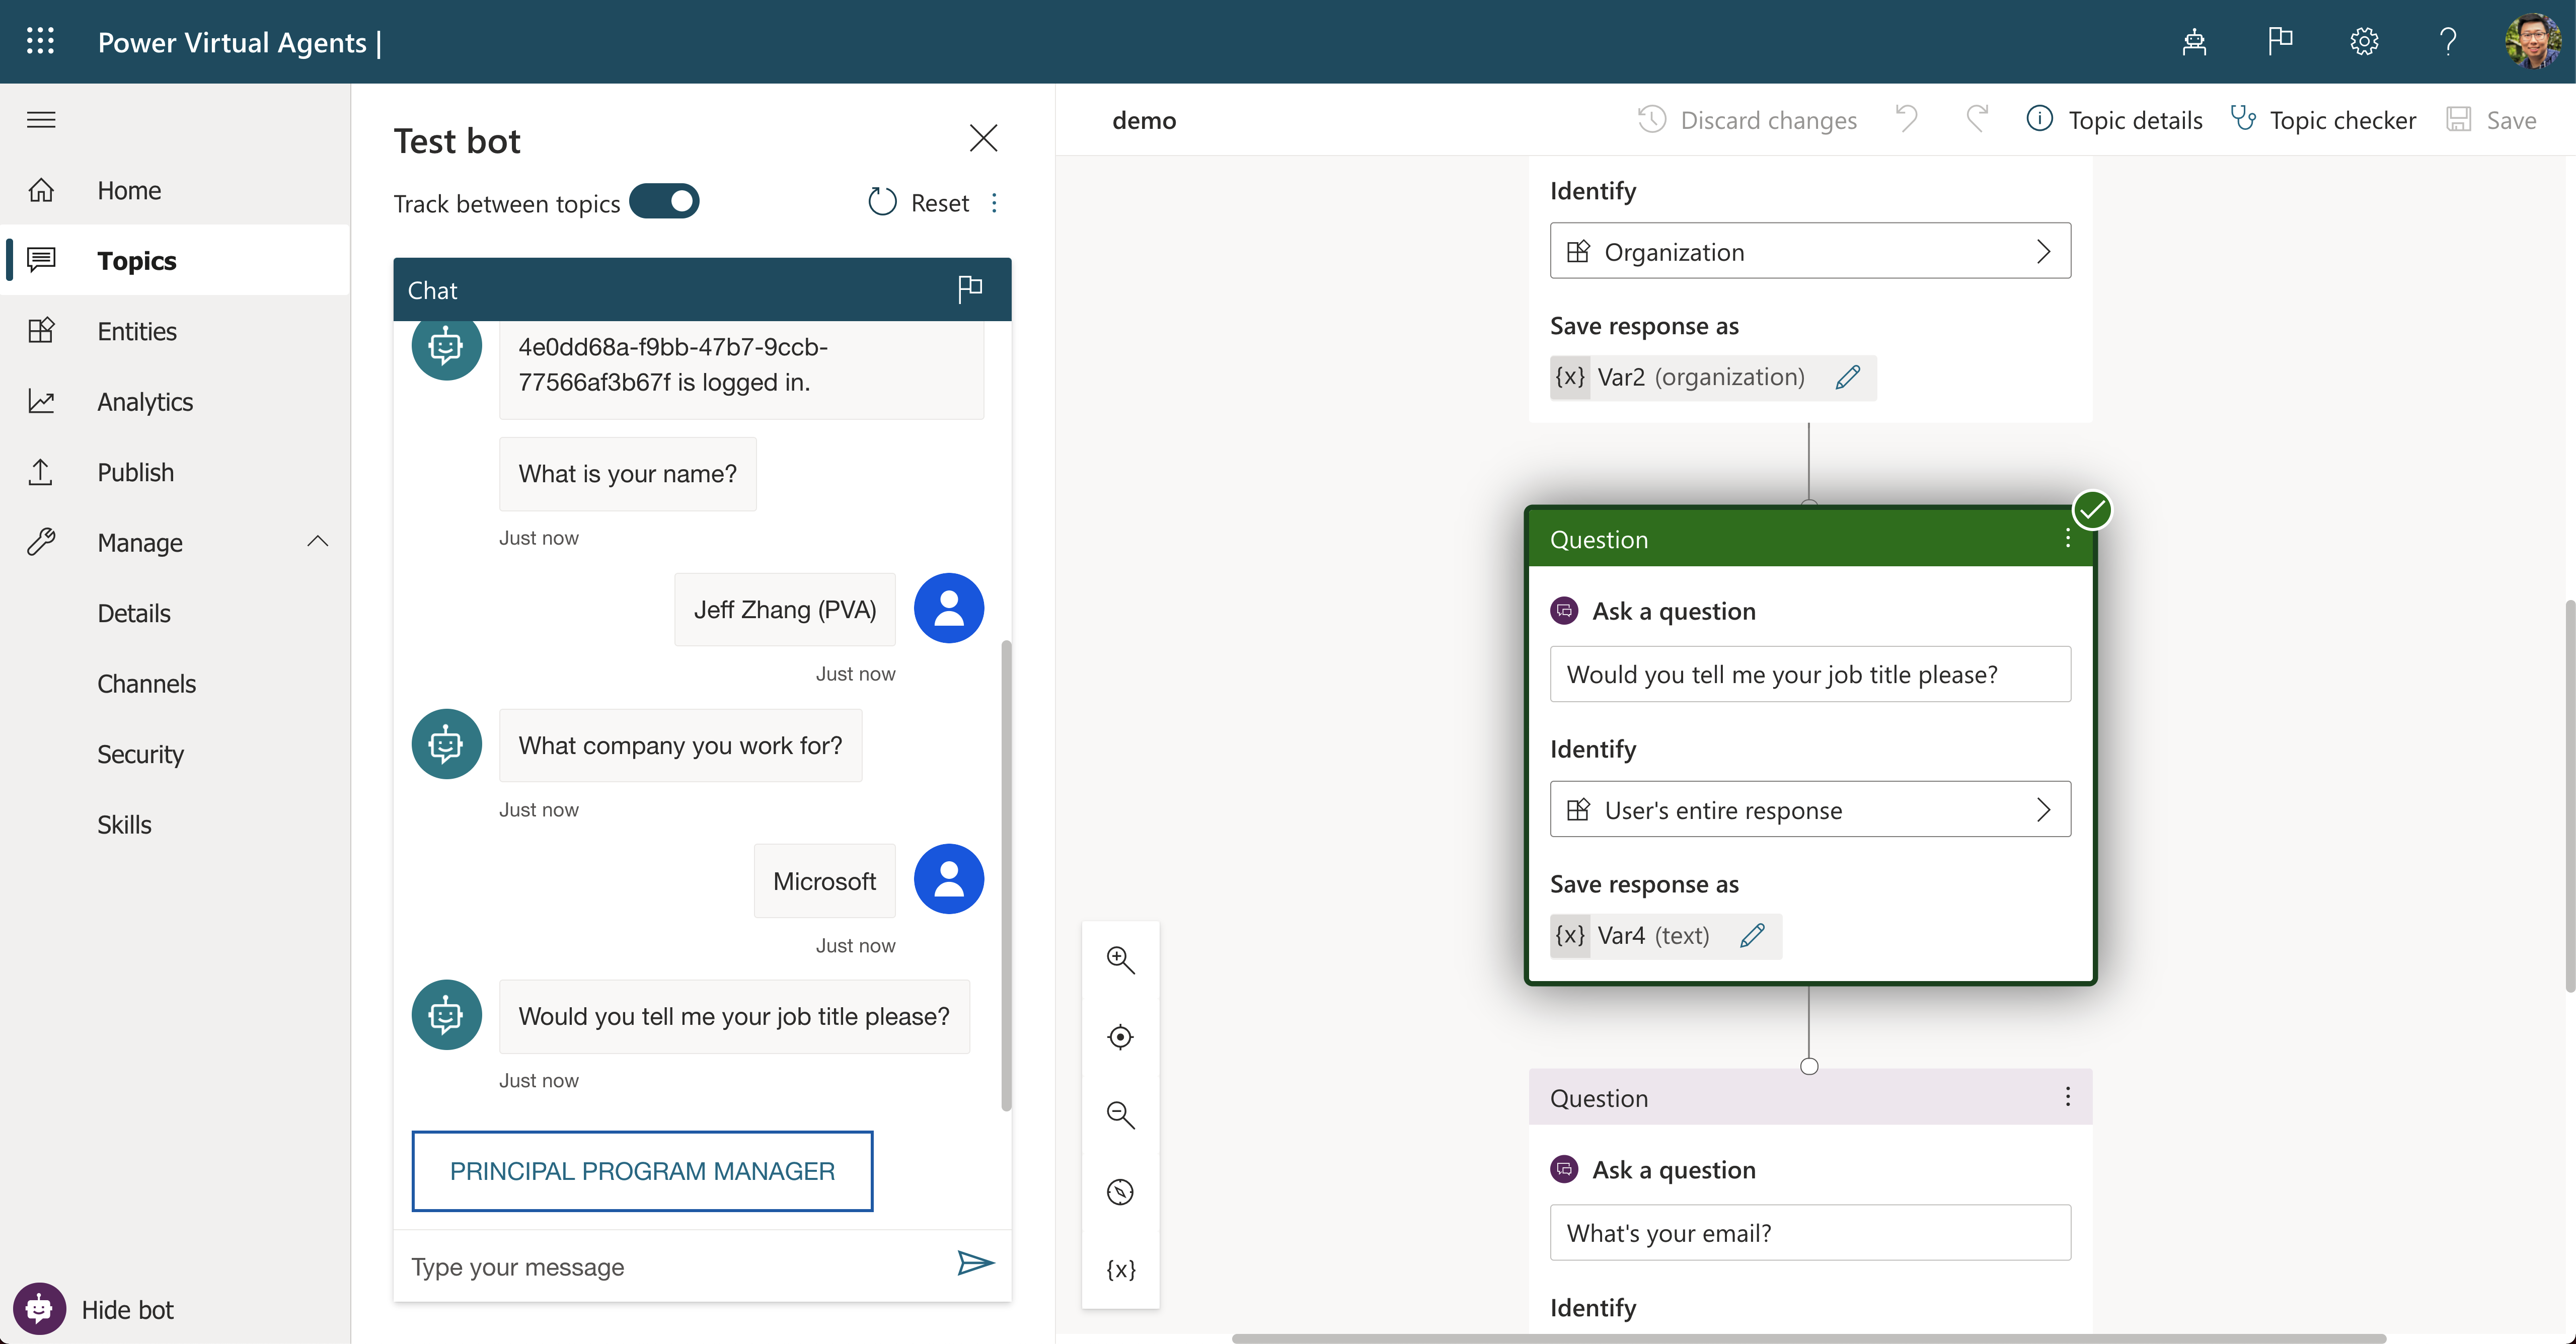 Through the course of conversations with a user, the bot will reuse information from Microsoft Graph and Microsoft Azure Active Directory, leveraging it to enhance and personalize future conversations.